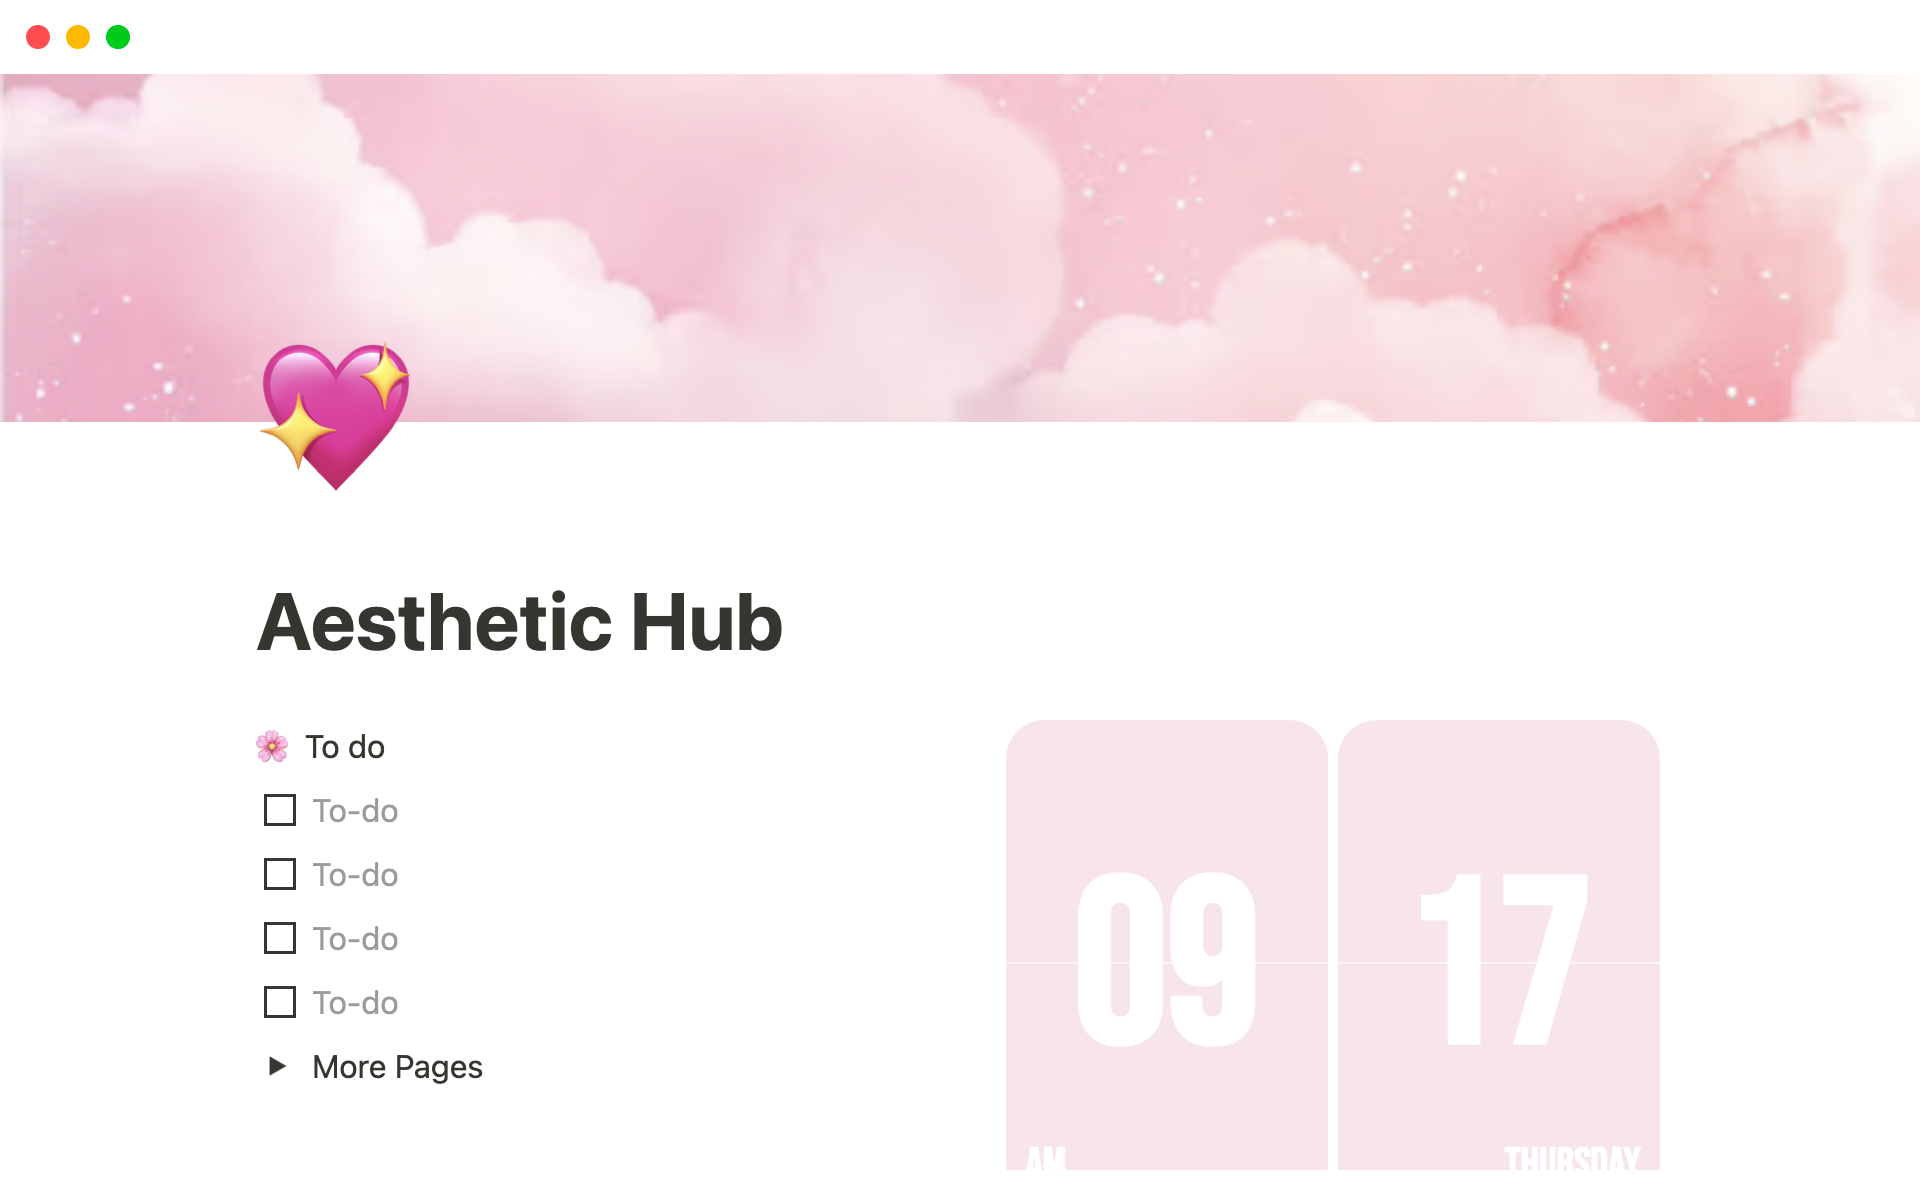 This Template Has A Pink Aesthetic Hub So If You Love Pink You Don't Have To Make A Hub